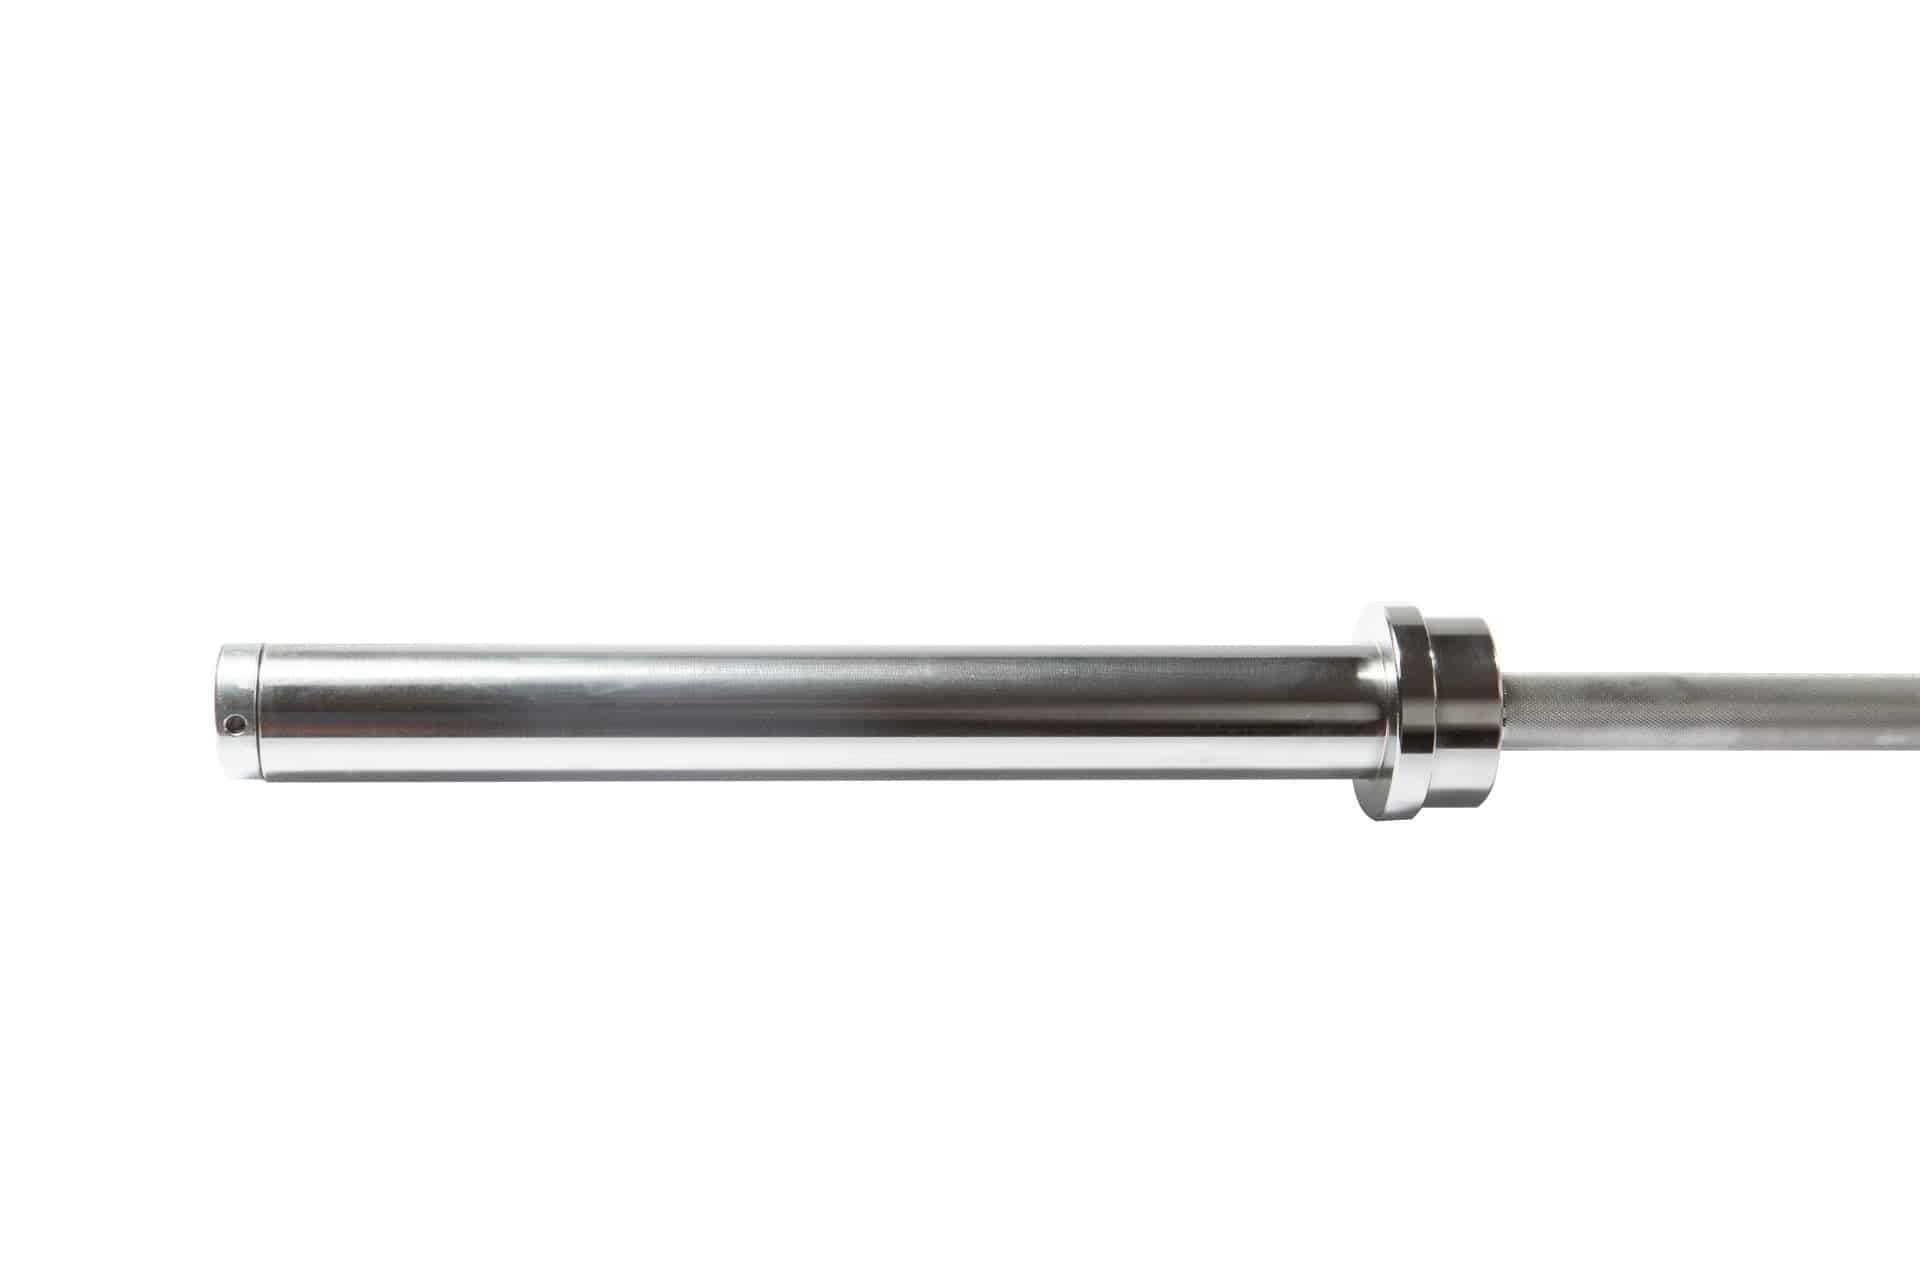 York Barbell | Men's Olympic Elite Power Bar - 29mm - XTC Fitness - Exercise Equipment Superstore - Canada - Powerlifting Barbell